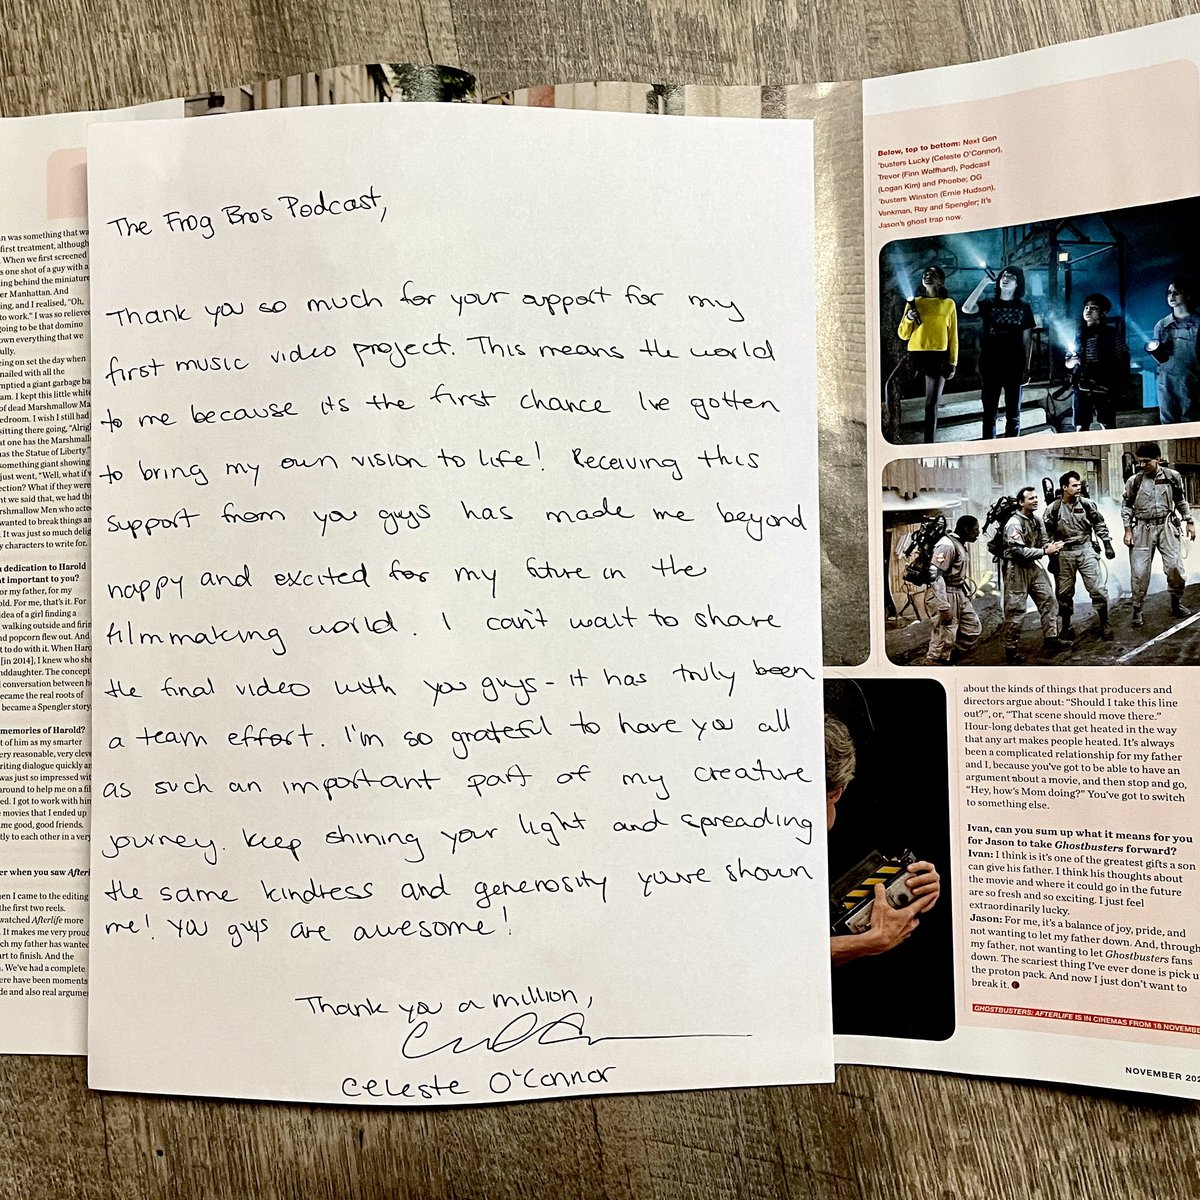 We helped back a music video project by the talented @celeste_oconnor and got this amazing letter in return! Our first signature from the new cast of @Ghostbusters Afterlife! #ghostbusters #ghostbustersafterlife #iaintafraidofnoghost #whoyougonnacall #celesteoconnor #autograph